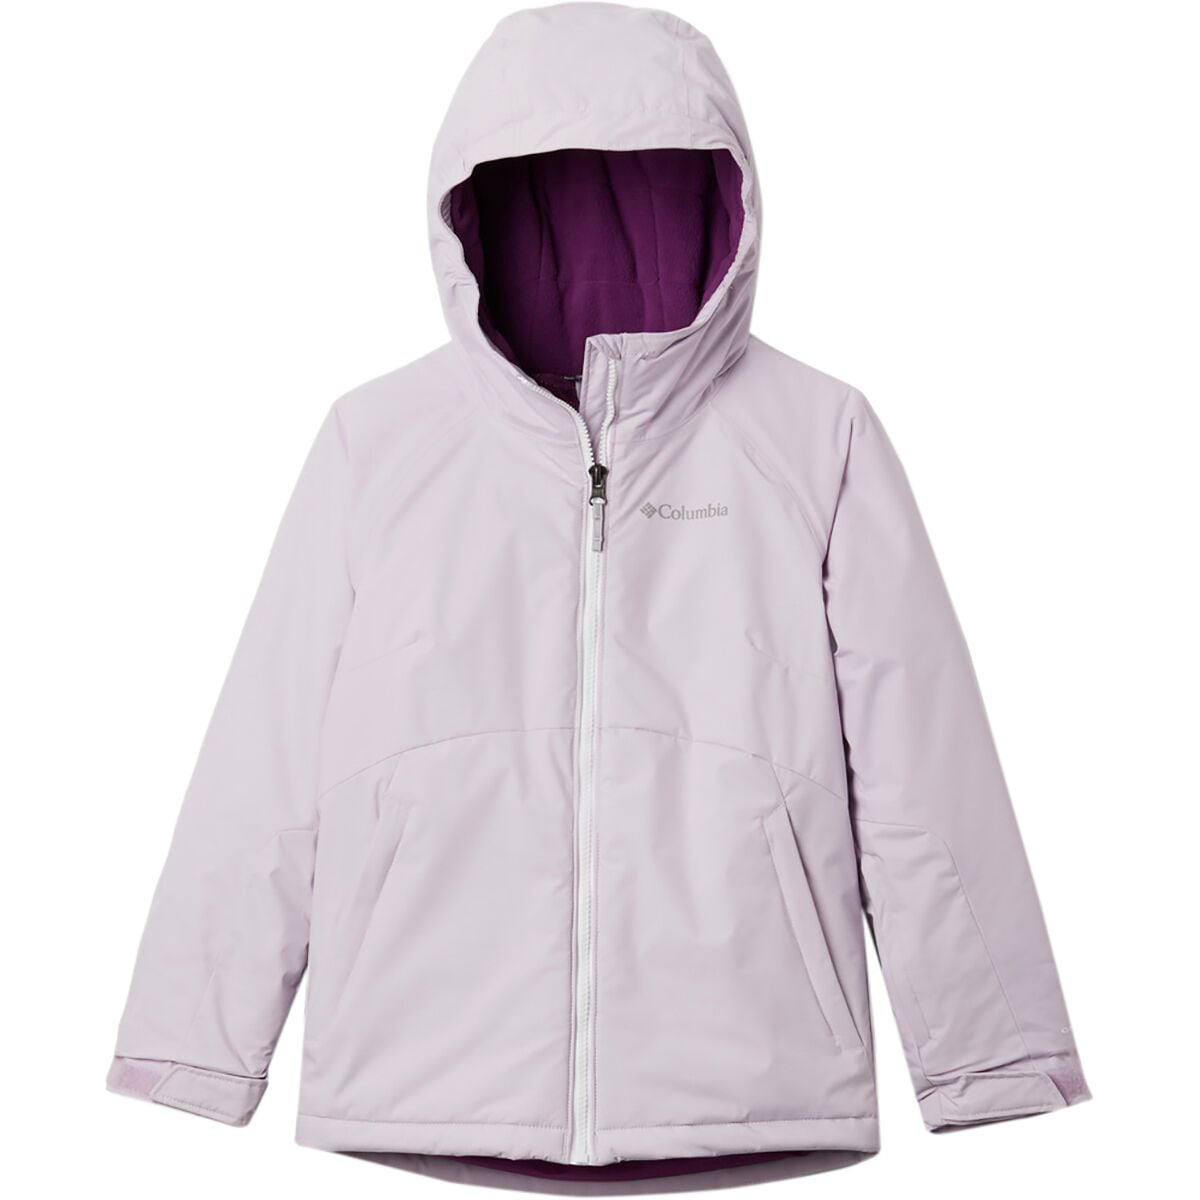 Columbia Alpine Action II Jacket - Girls' Pale Lilac Heather/Pale Lilac/White